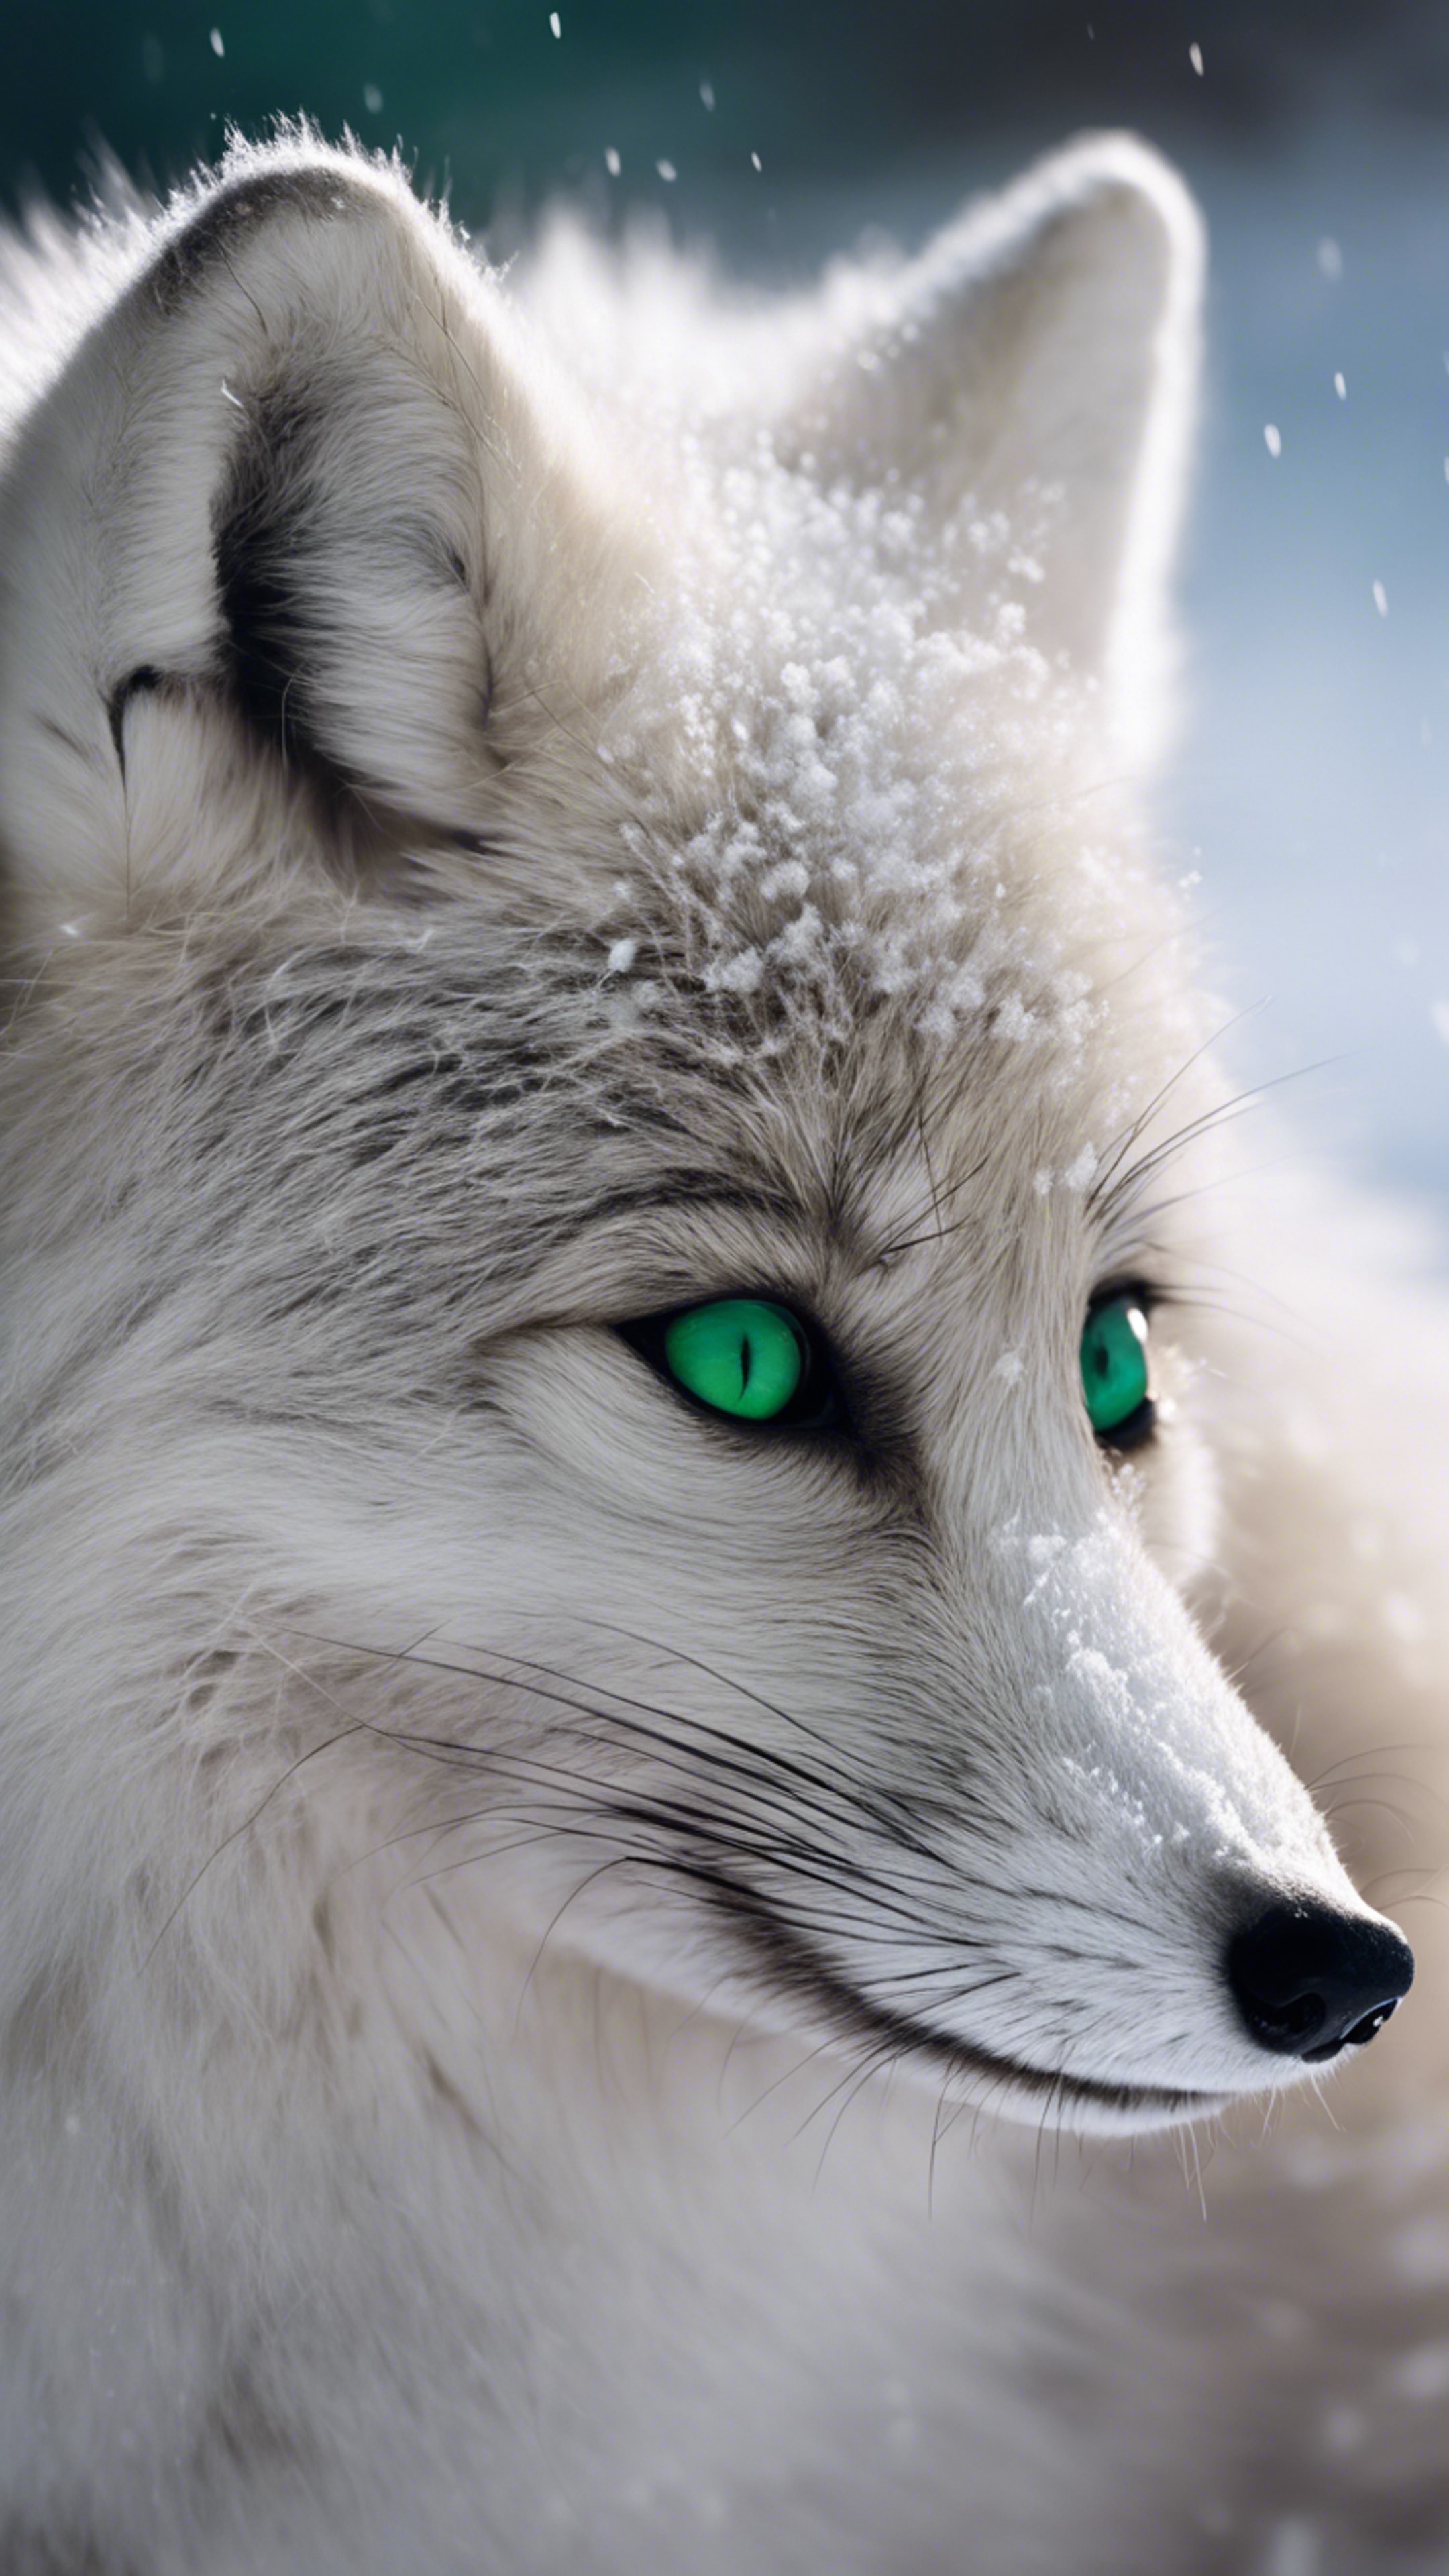 A fluffy, smoky gray arctic fox curled up in a snowy setting, its vivid green eyes staring directly at the viewer. 墙纸[a0ededdcc5bf4726bdb5]